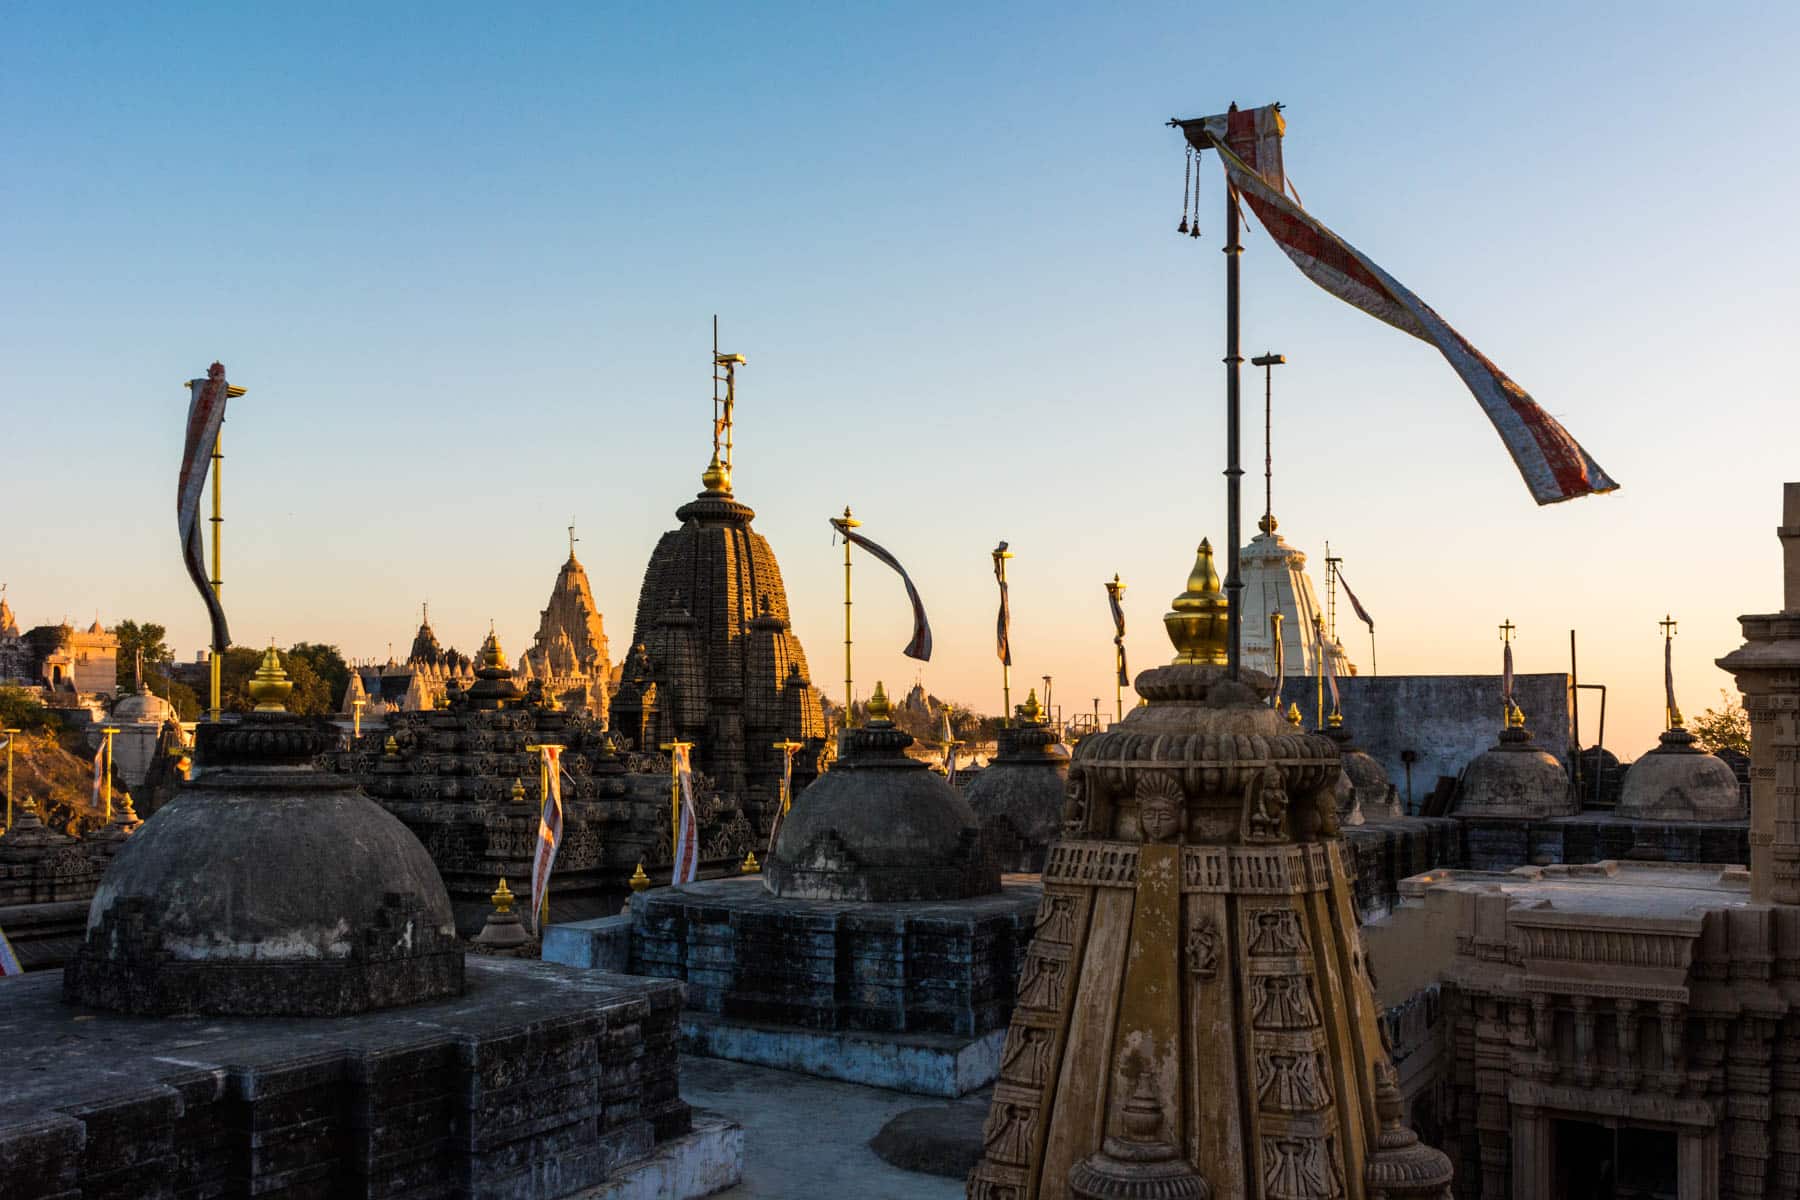 Ways of getting more off the beaten track while traveling - Jain temples at sunrise in Palitana, India - Lost With Purpose travel blog